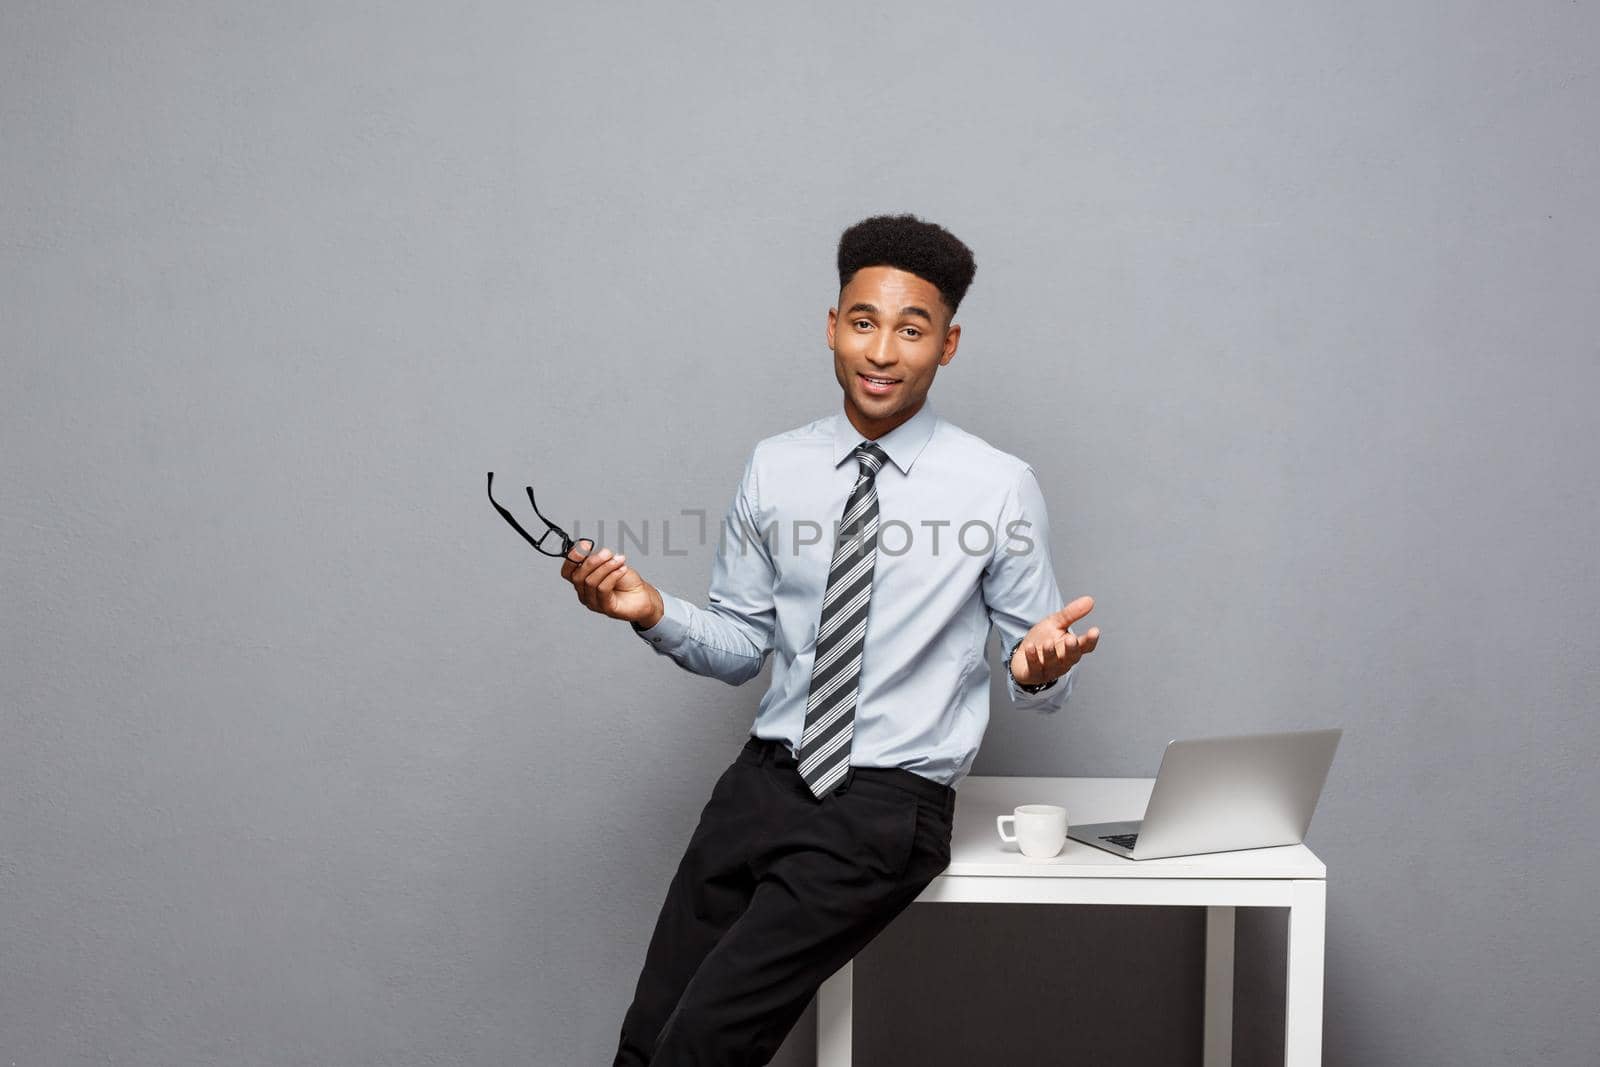 Business Concept - portrait of african american businessman with glasses having coffee sitting at a desk